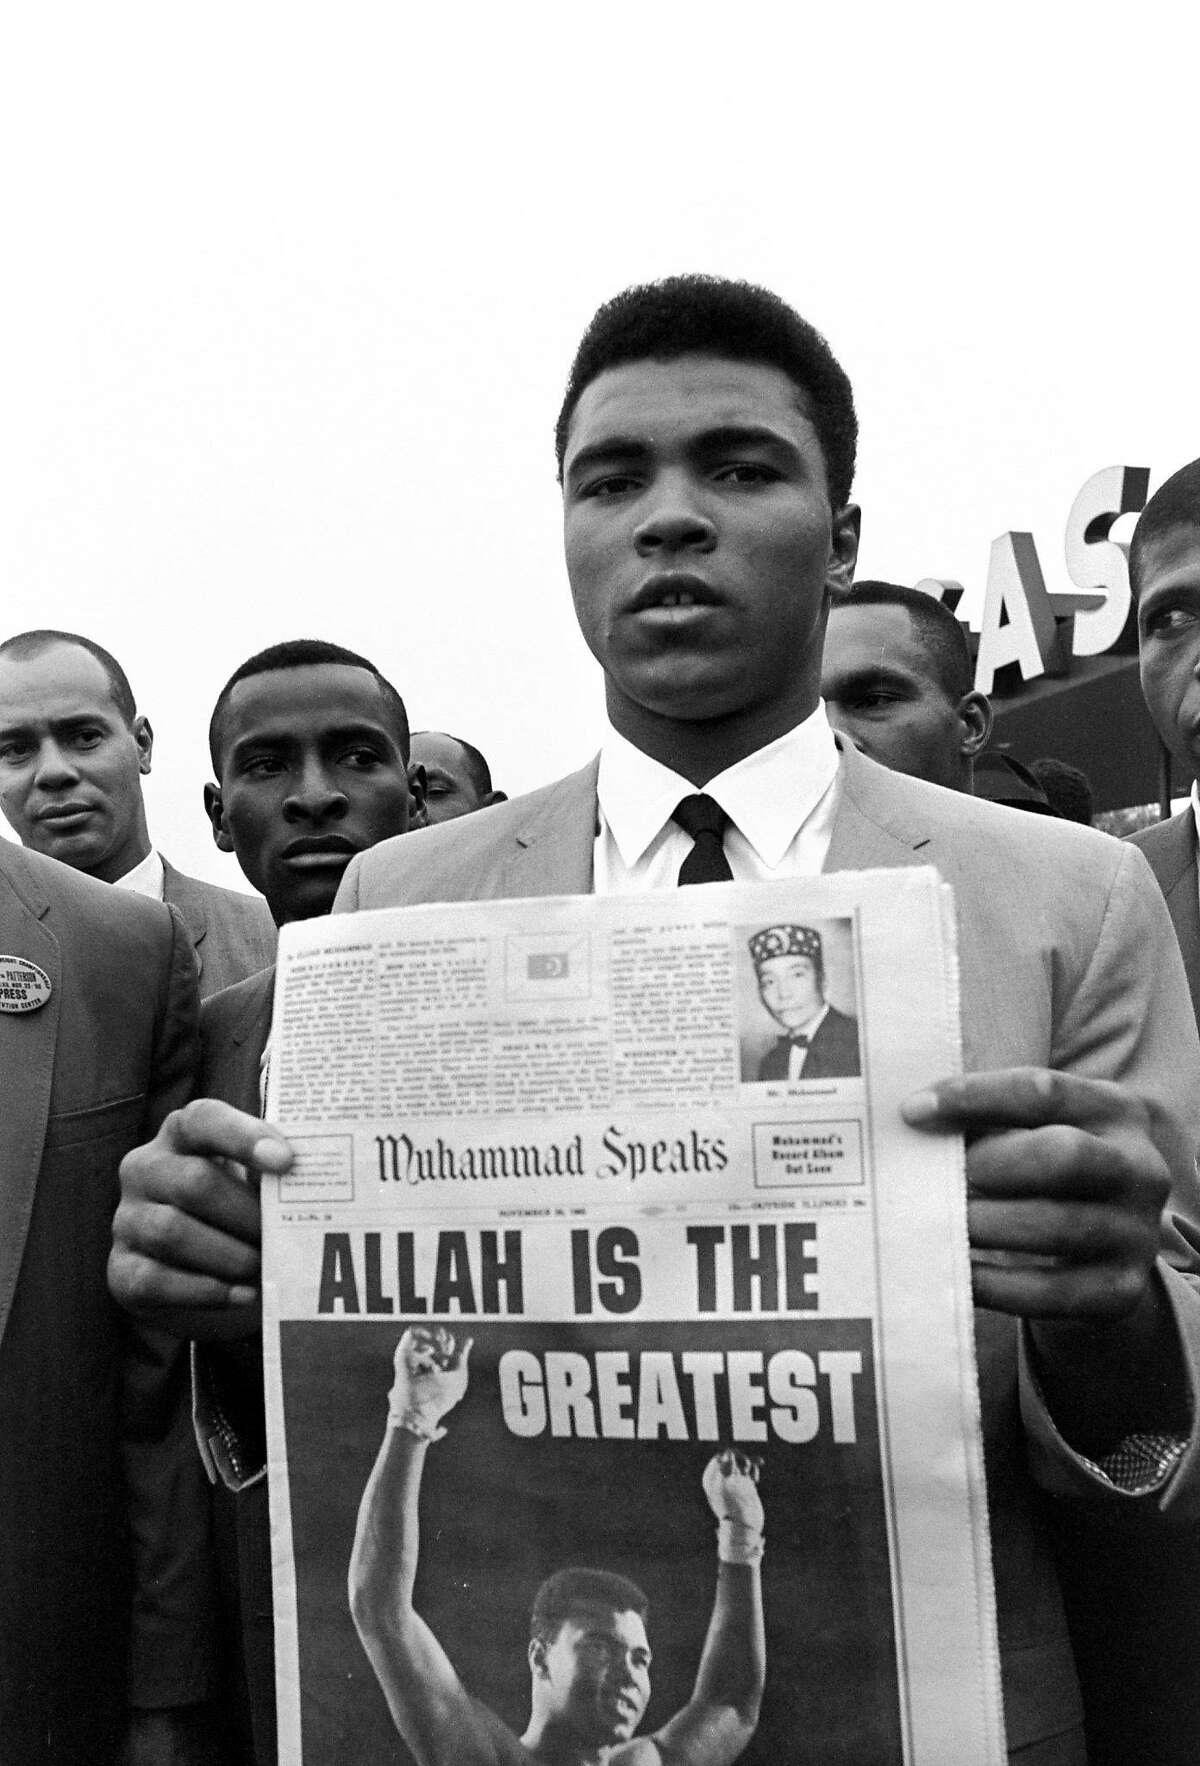 FILE - In this Nov. 22, 1965 file photo, heavyweight champion Muhammad Ali, holds a "Muhammad Speaks" newspaper bearing his picture as he and followers of the Muslim sect leave the Las Vegas convention center after weigh-in ceremonies to defend his title against challenger Floyd Patterson. In a 1964 interview with The Associated Press in which he formally declared himself a Muslim, Ali said he didn�t like the phrase �Black Muslims,� and described Islam as �the true way to save the world, which is on fire with hate.� He declared "forced and token integration" was a "pacifier," or temporary solution to problems blacks face, and one group should not impose its culture on another. (AP Photo/Sal Veder)